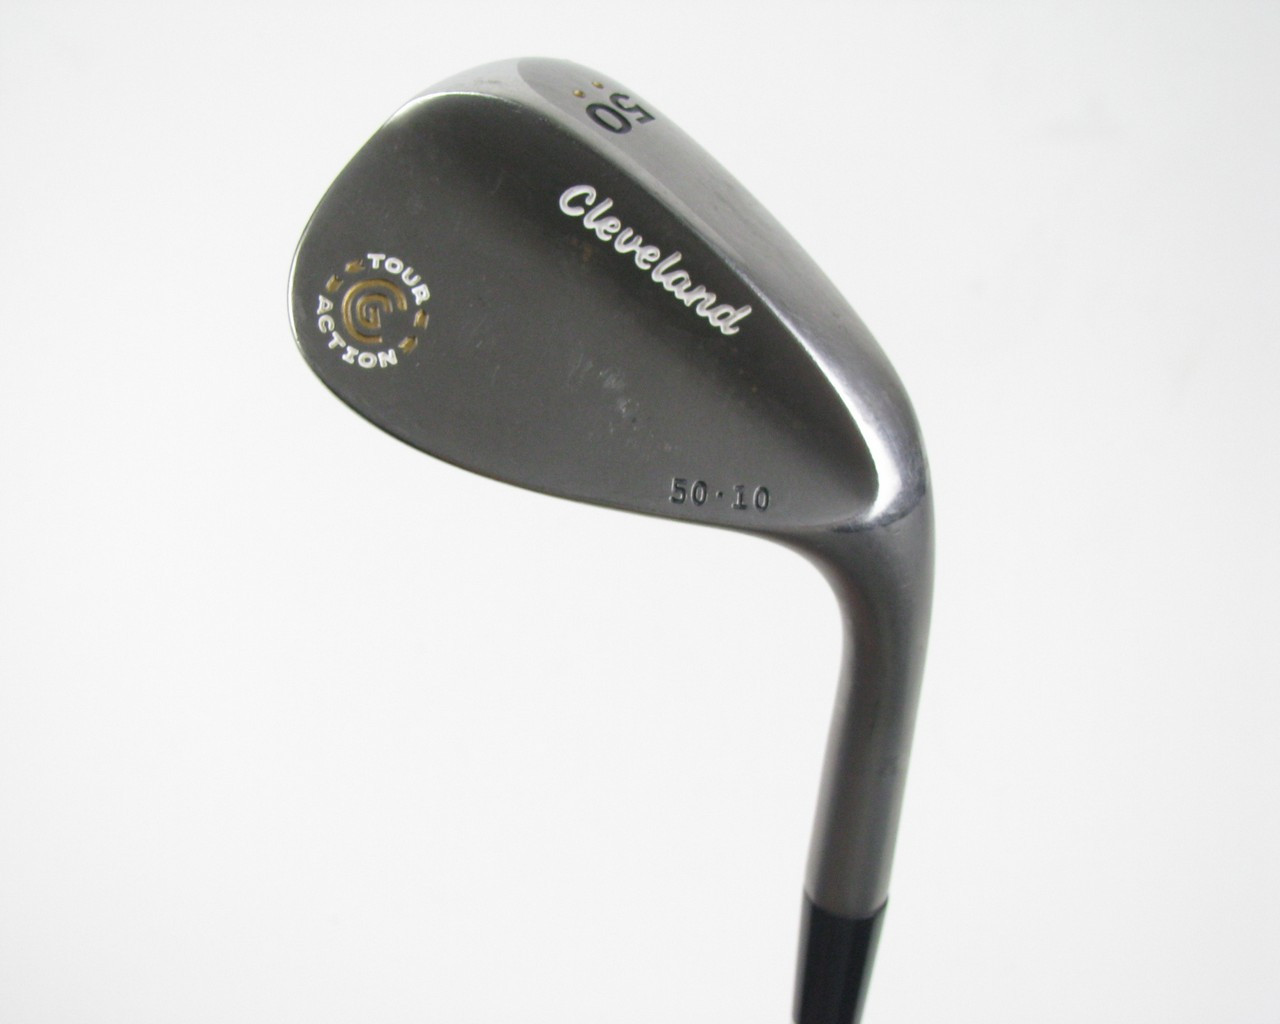 cleveland cg tour action wedge